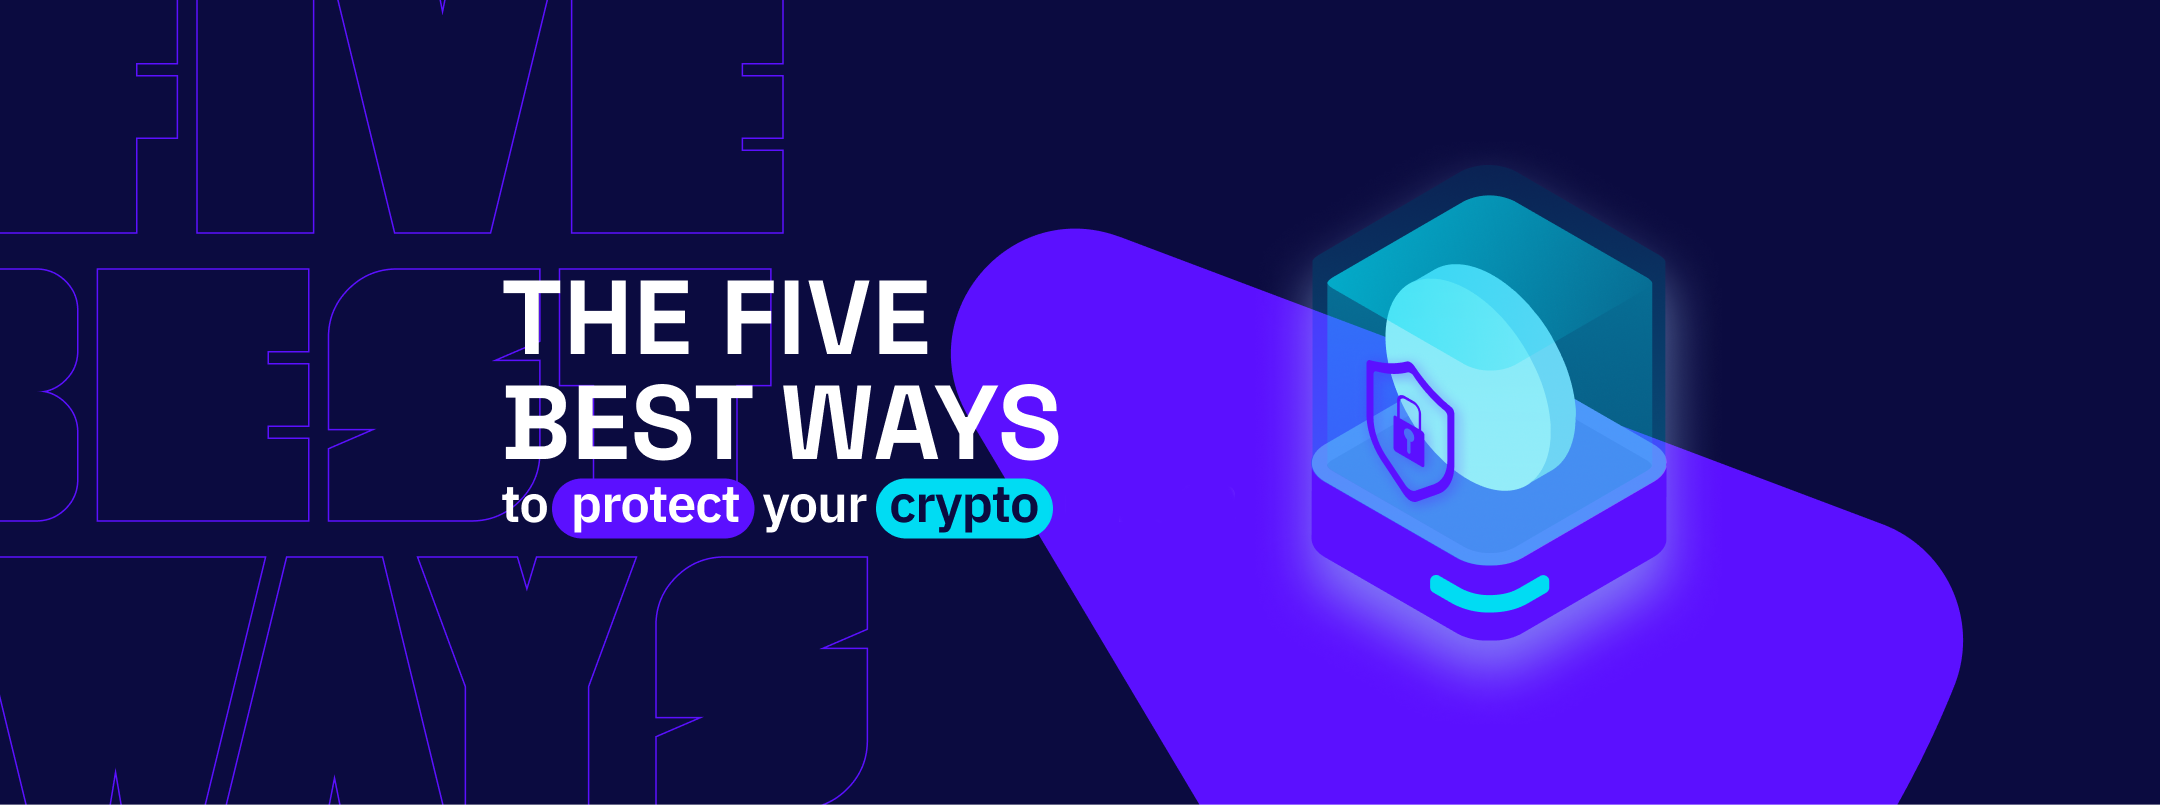 Here’s a New Year Resolution For You: 5 Best Ways to Protect Your Crypto